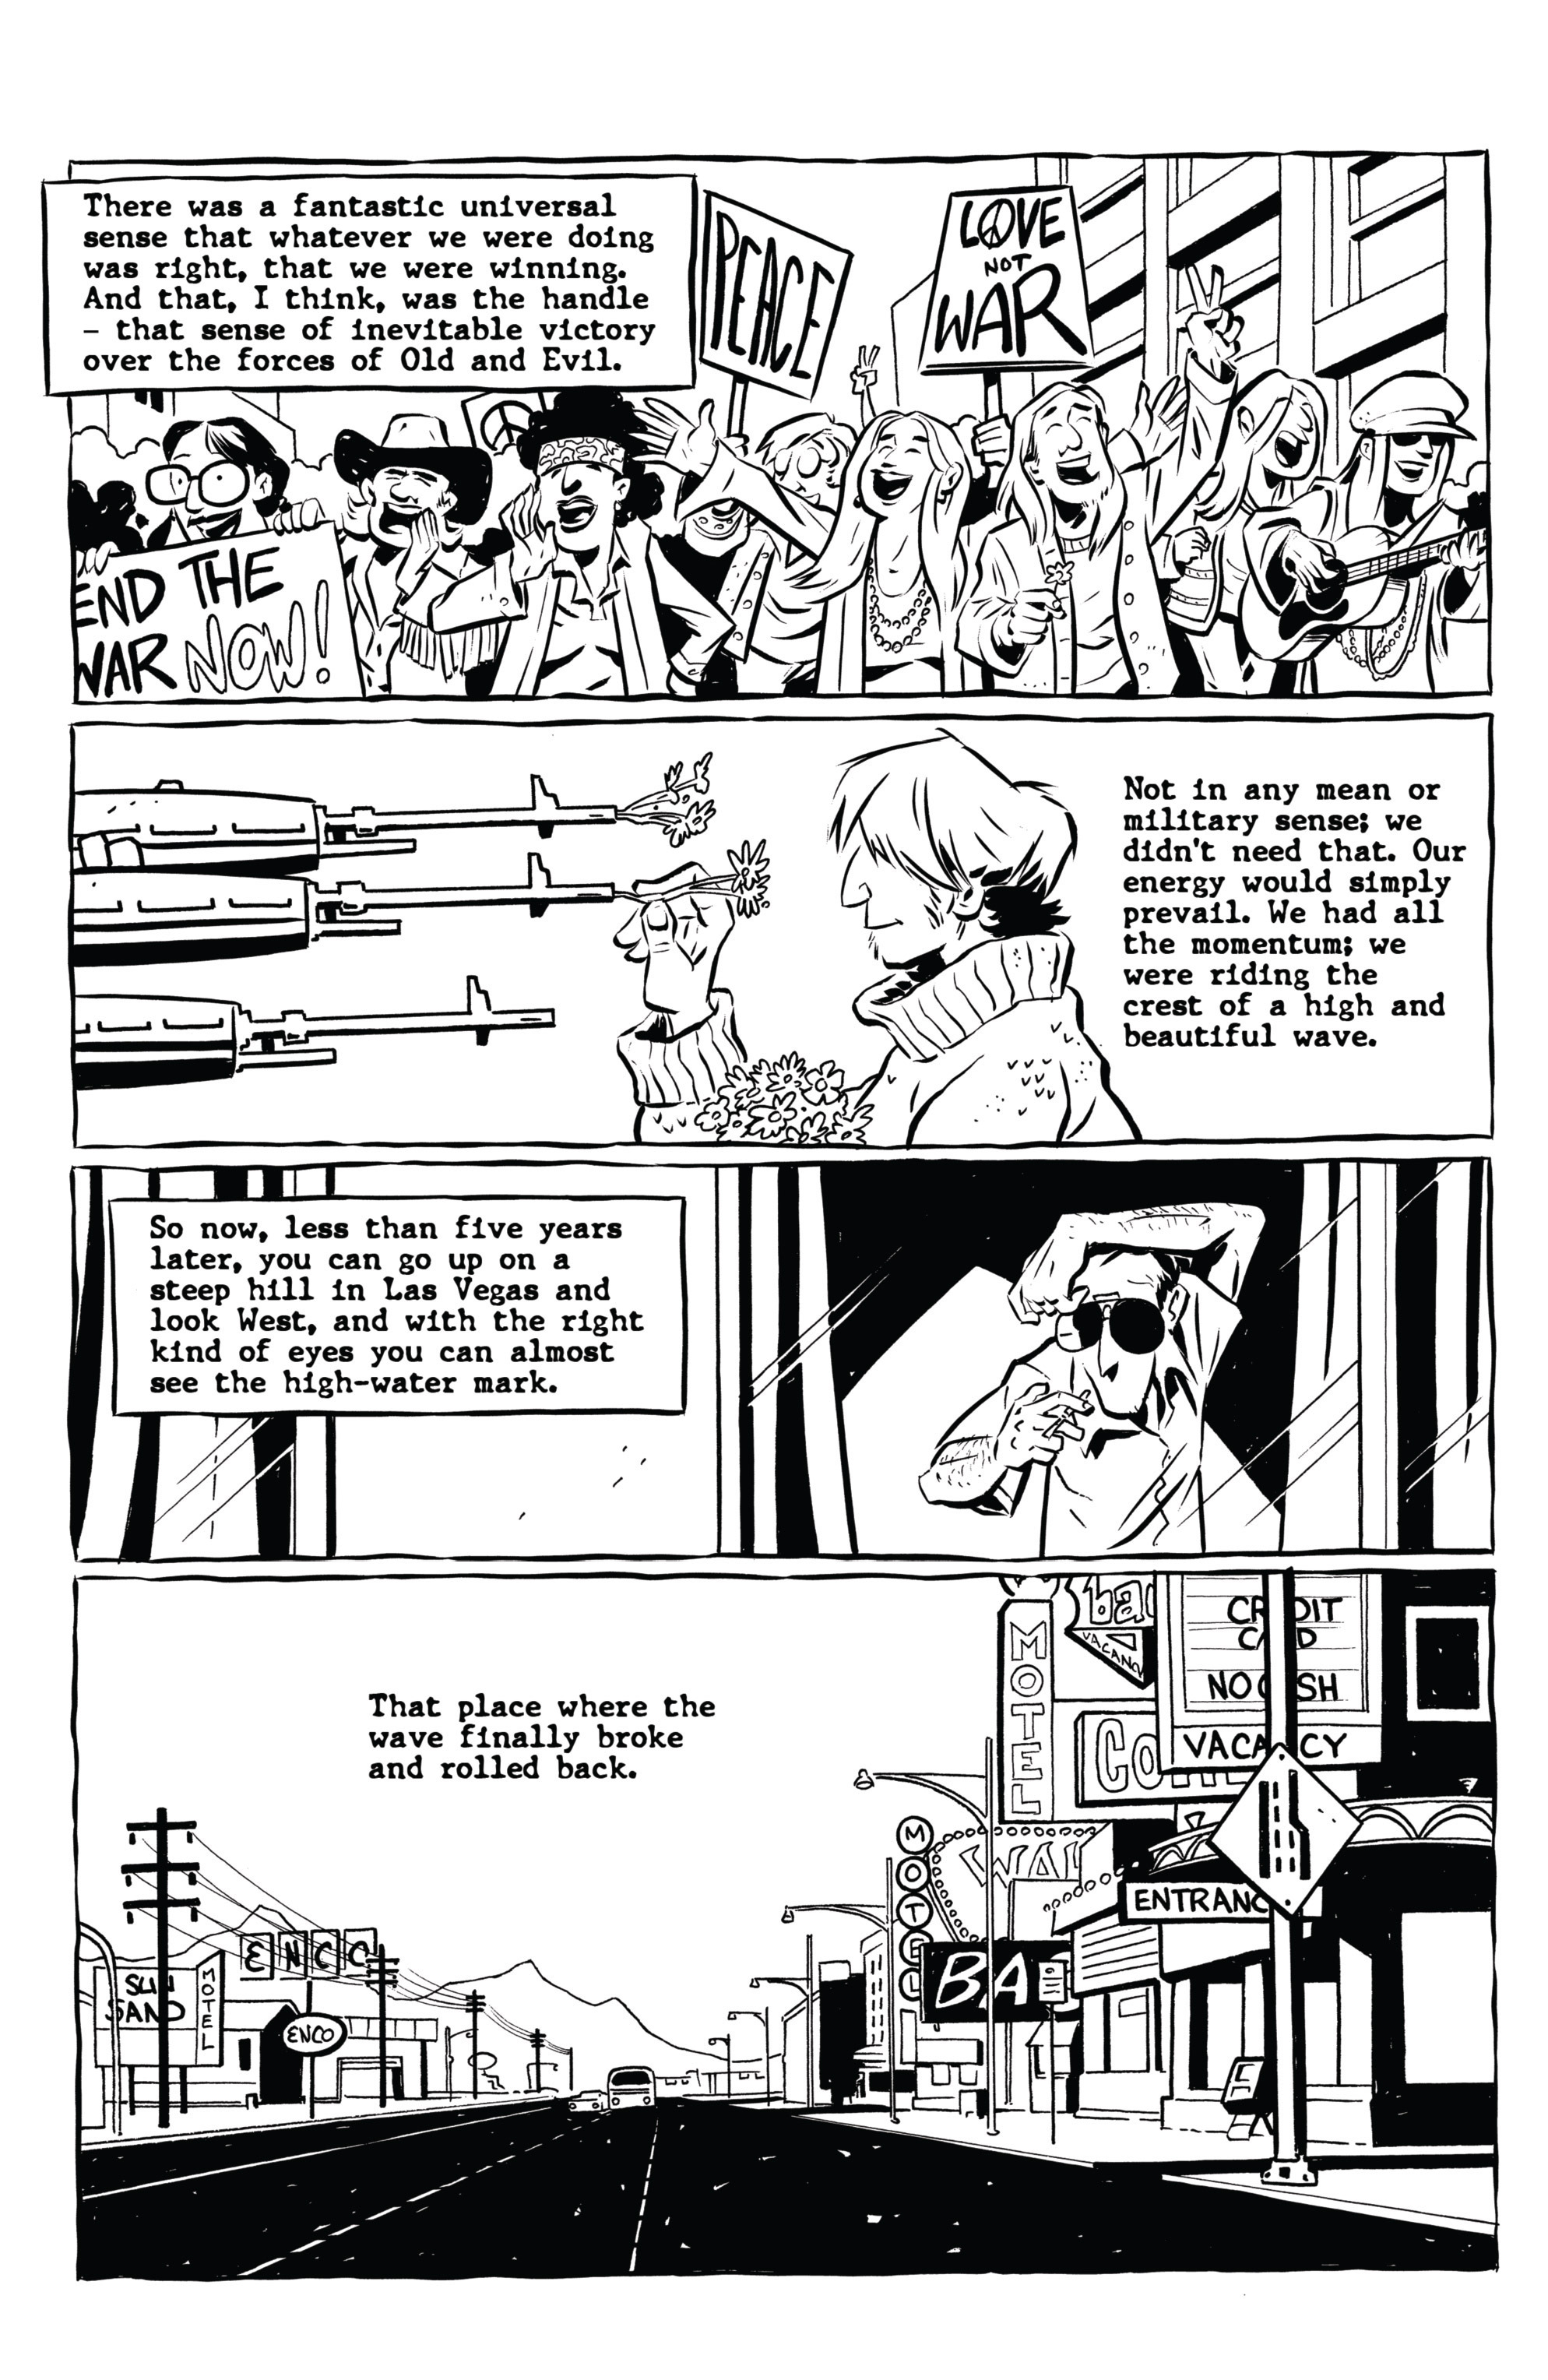 Read online Hunter S. Thompson's Fear and Loathing in Las Vegas comic -  Issue #2 - 34